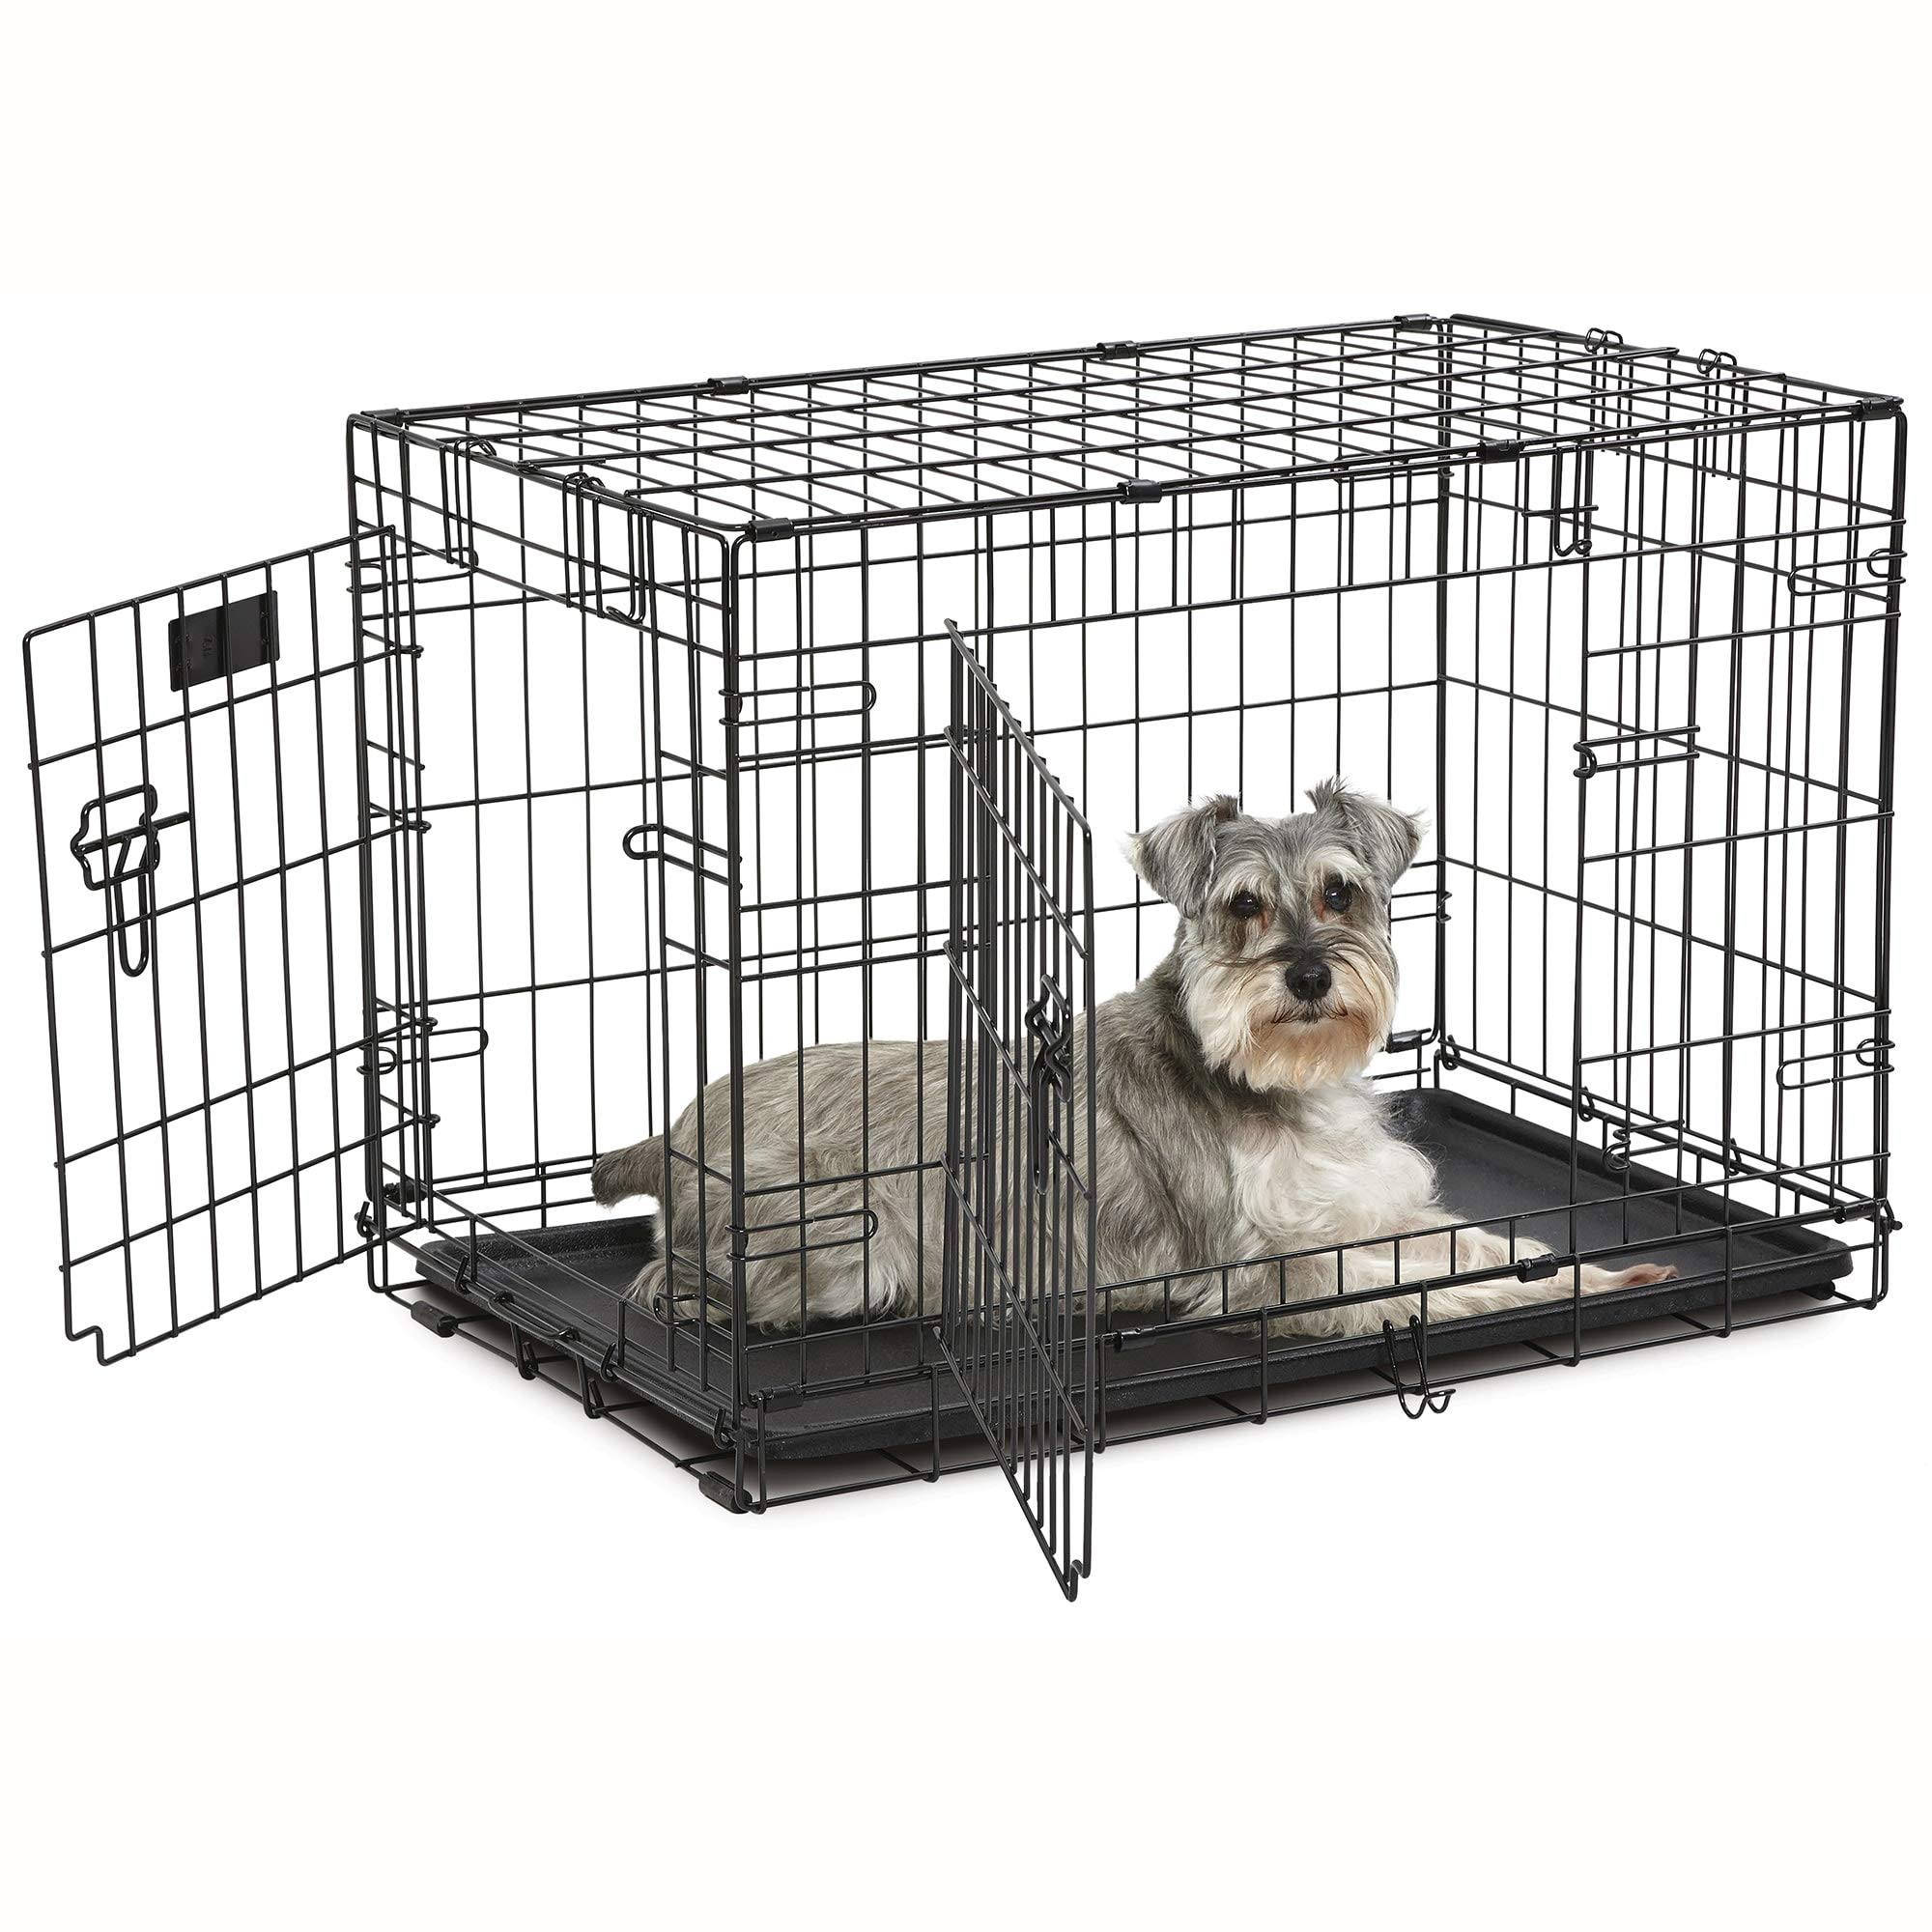 Midwest Products Co. 30" Contour Dbl Door Dog Crate